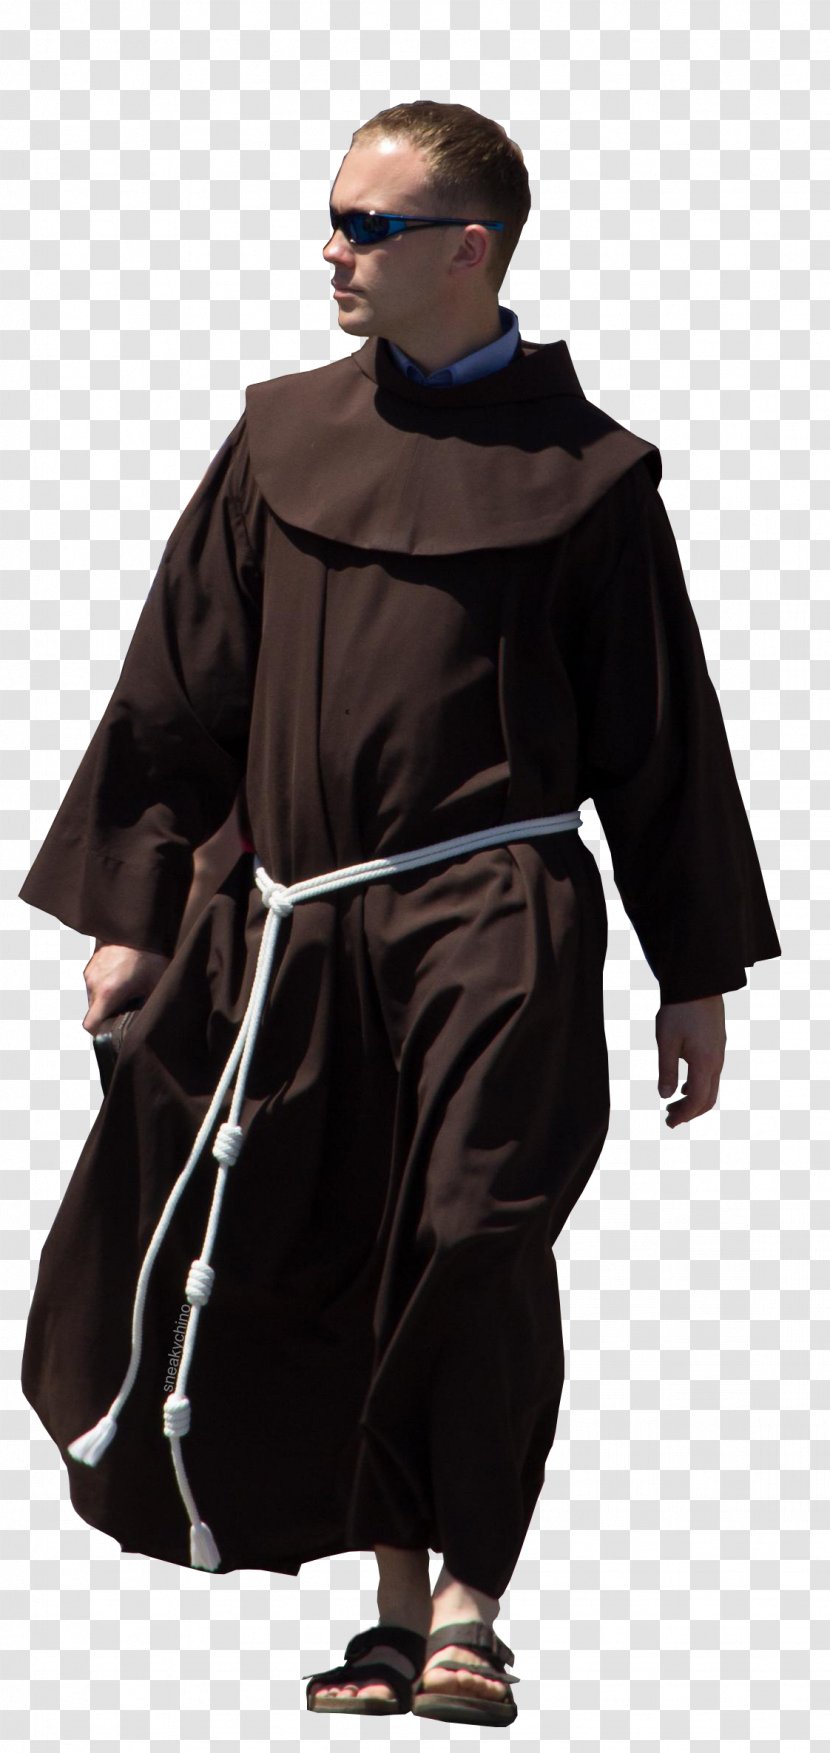 Robe Outerwear Academic Dress Costume Profession - Degree - Monk Transparent PNG